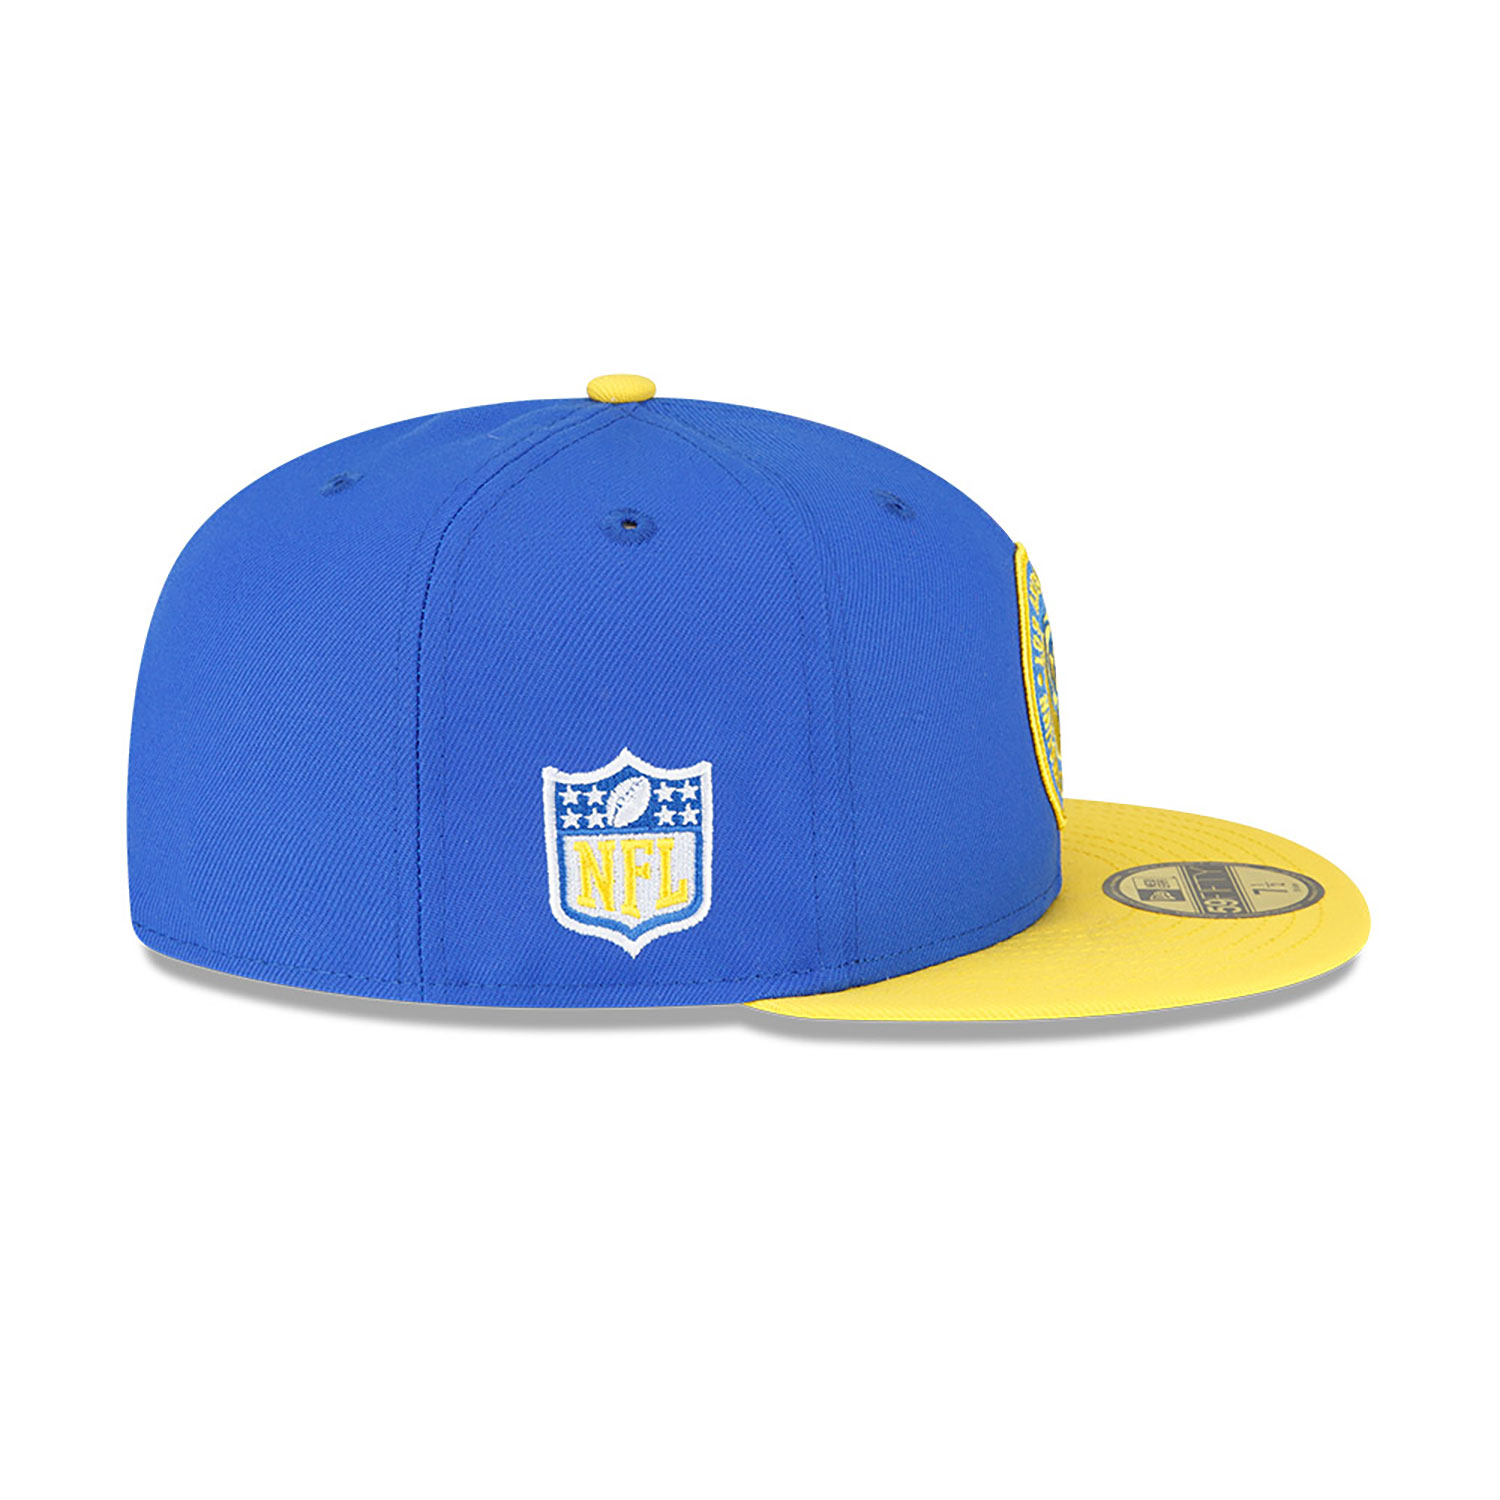 la rams hat fitted